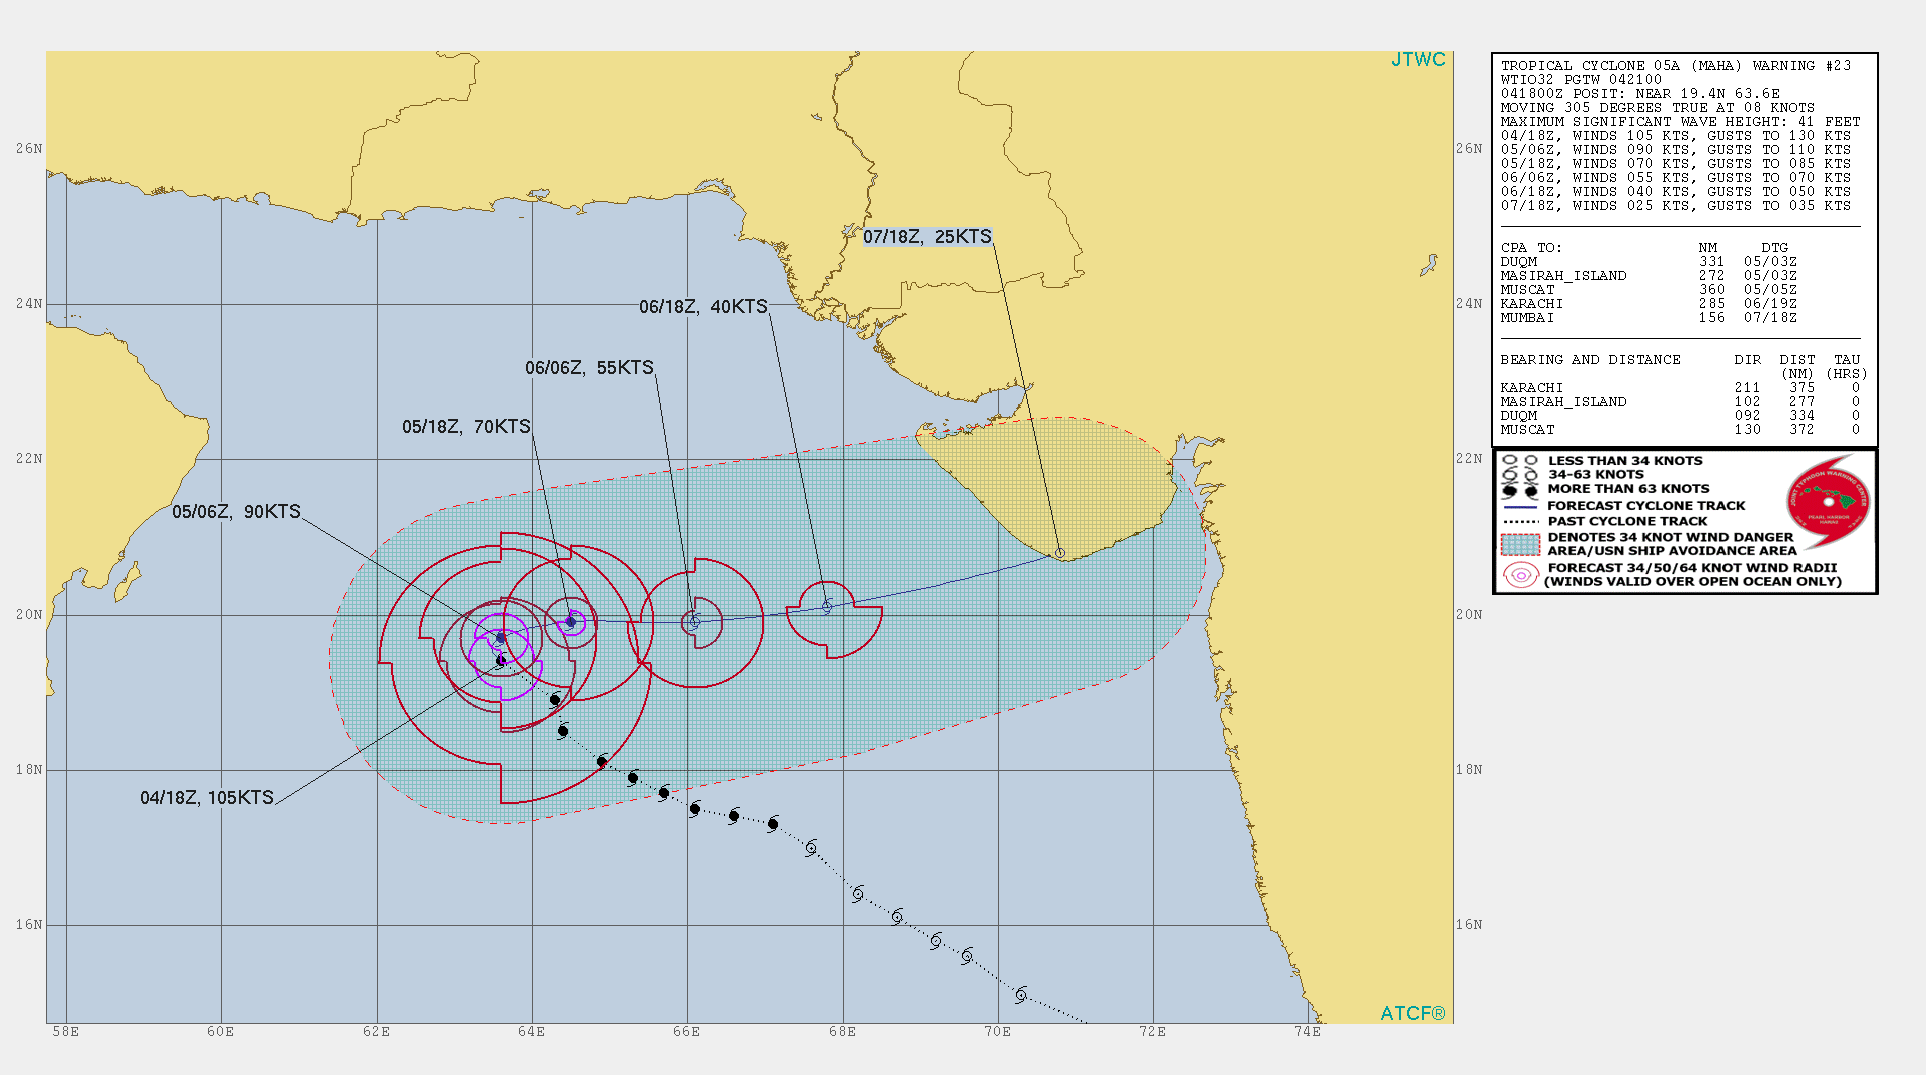 TC 05A: INTENSITY FORECAST TO FALL BELOW 65KTS AFTER 24H